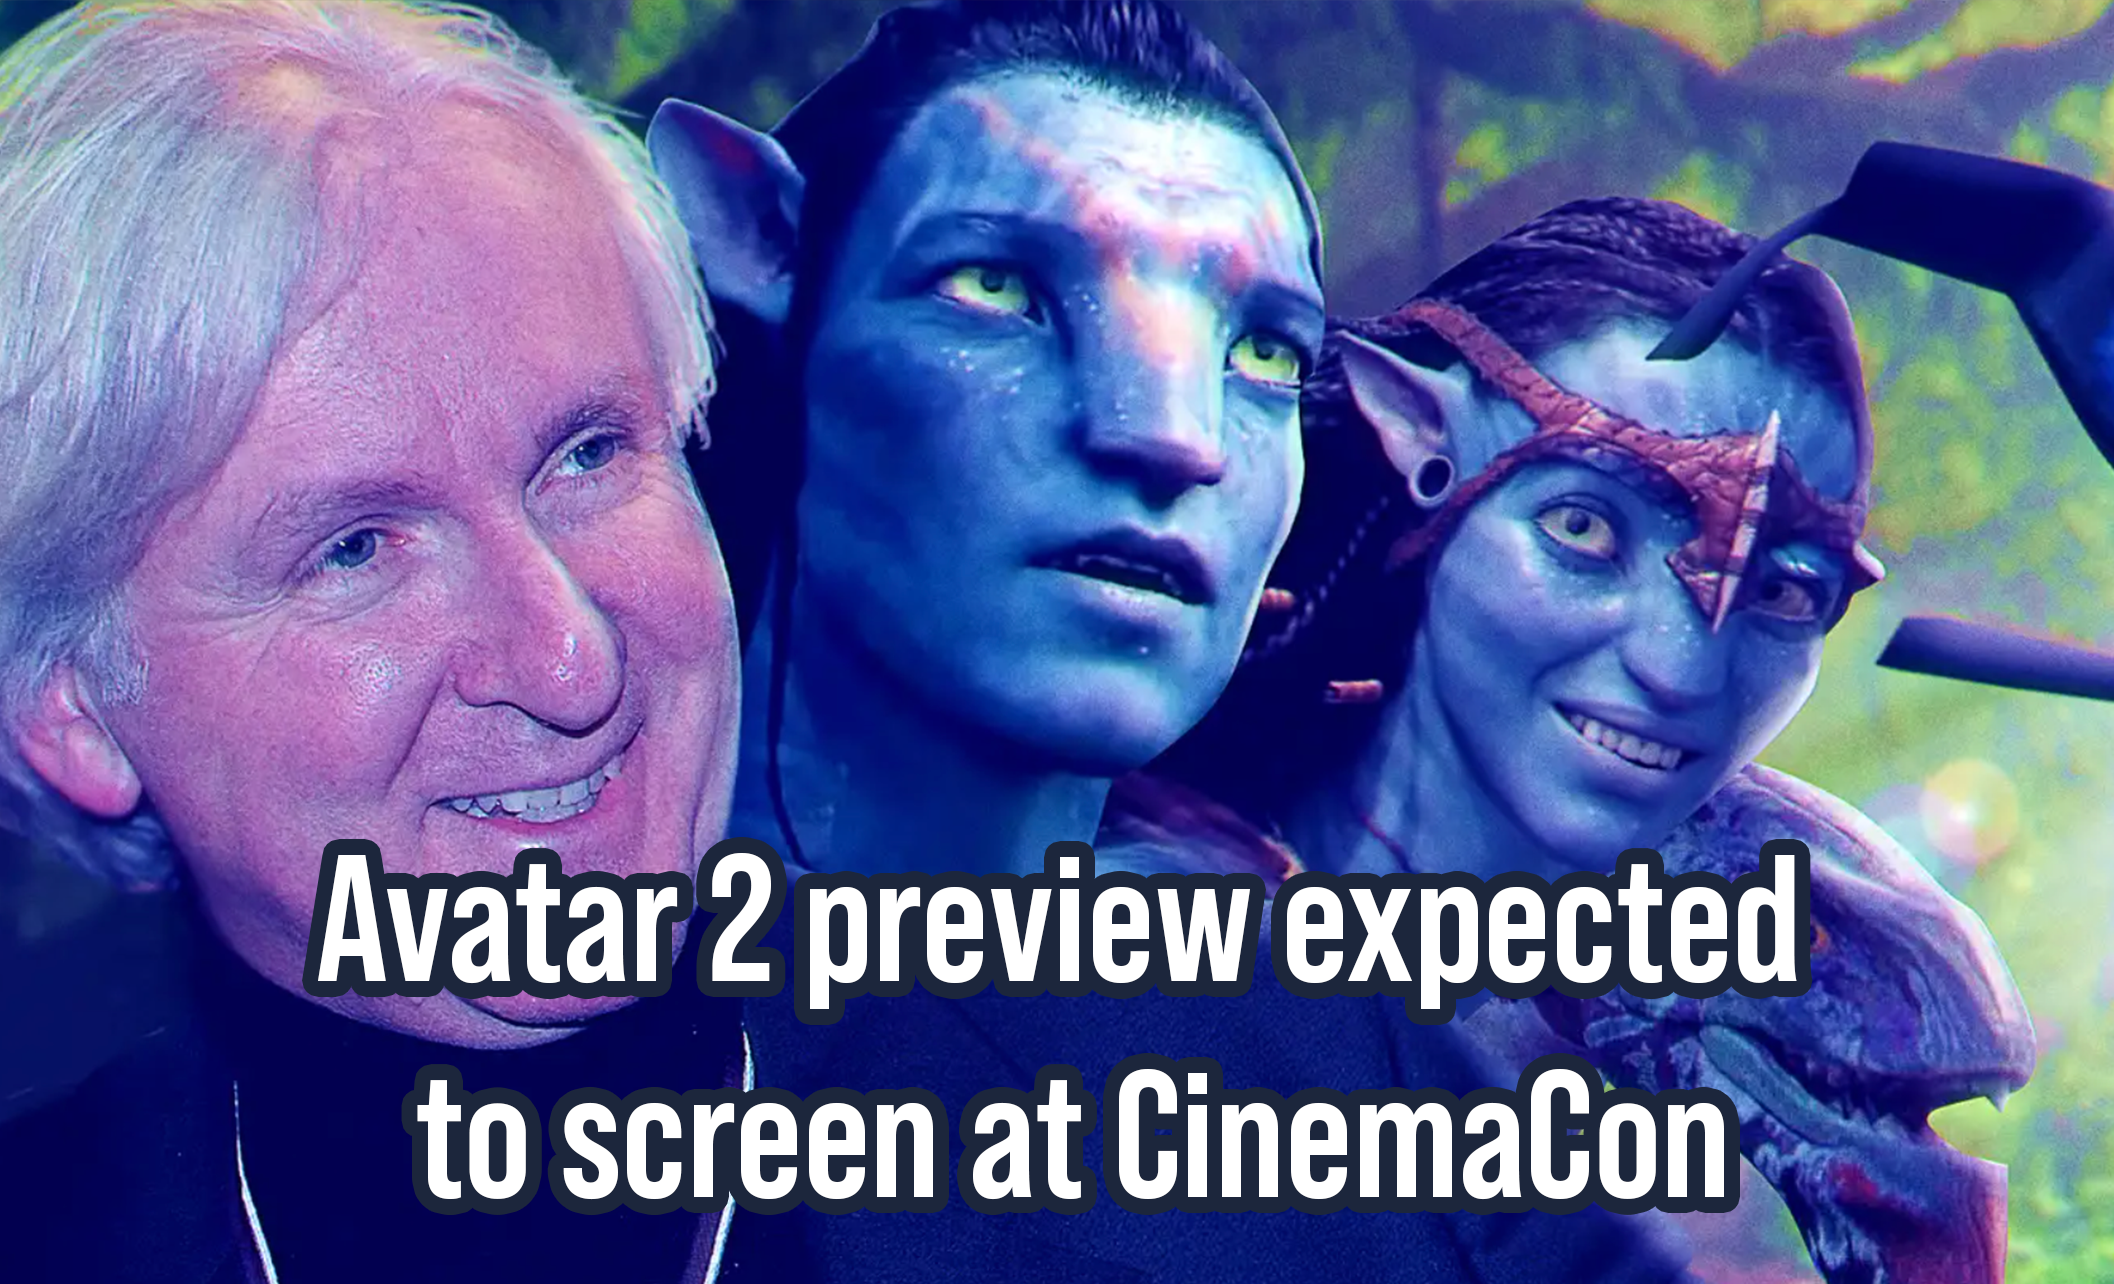 Avatar 2 preview expected to screen at CinemaCon